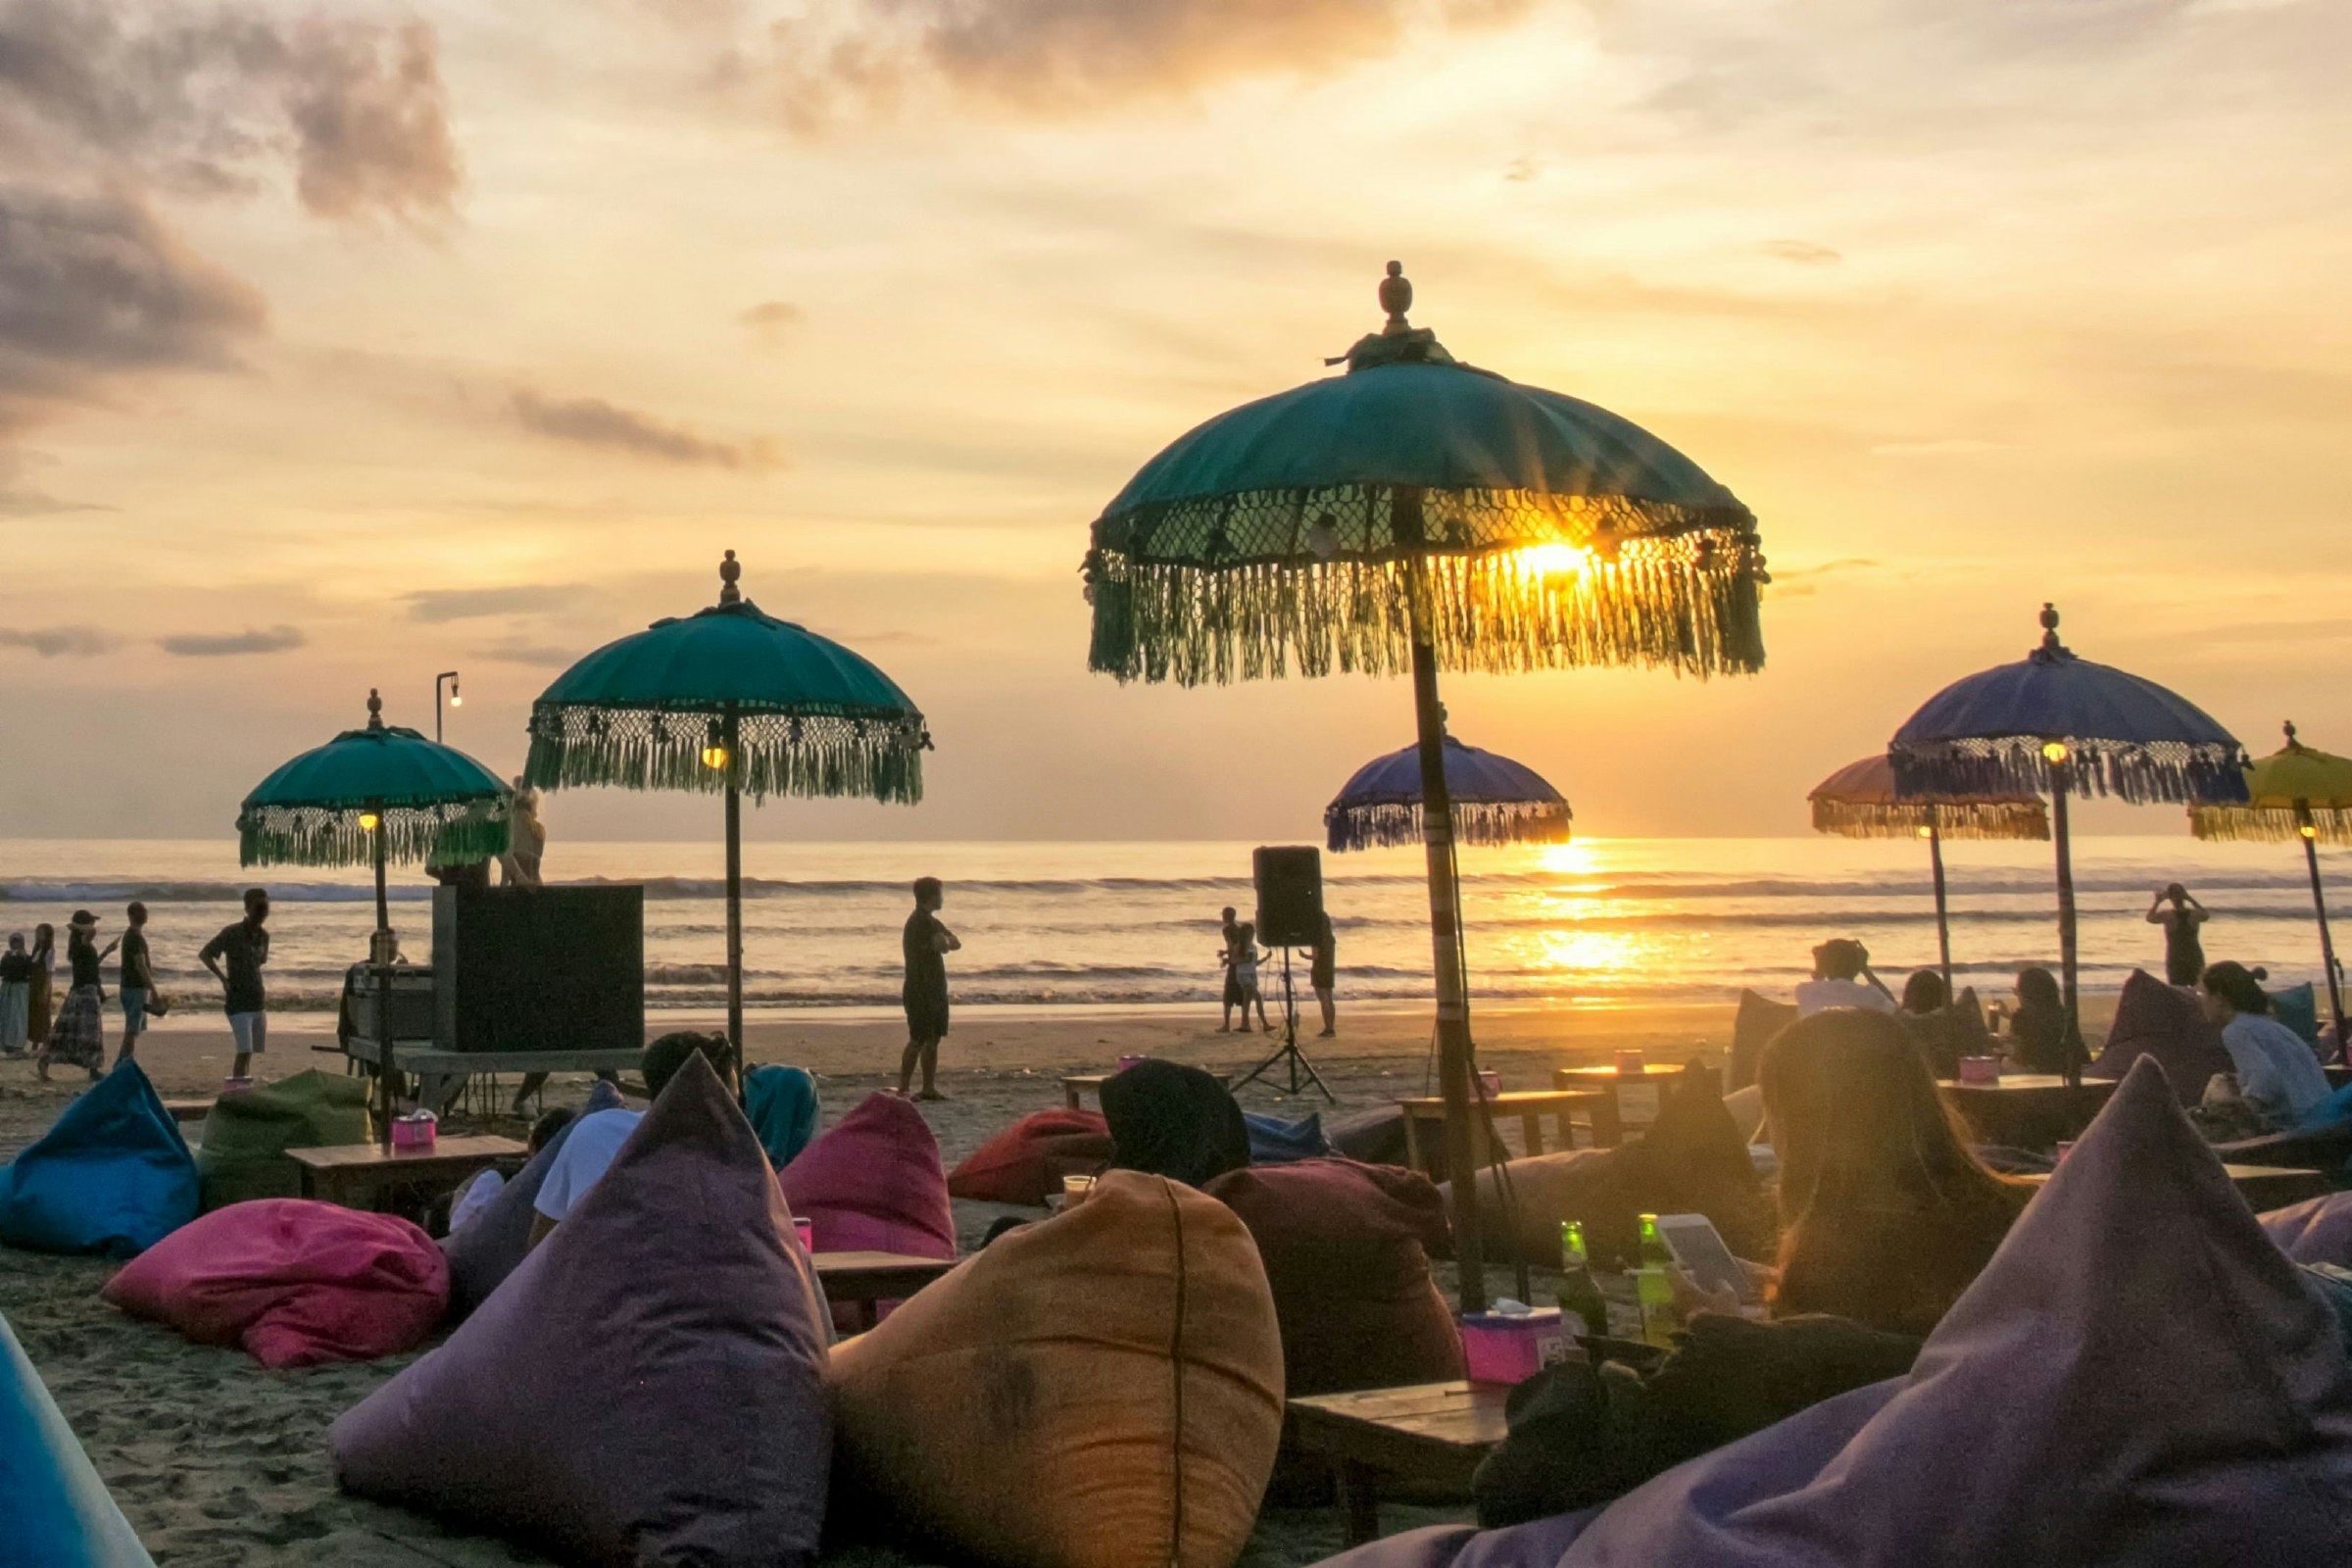 Travellers sit on beanbags scattered on the sands of Seminyak Beach in Bali, Indonesia. The beanbags all have small wooden tables next to them and umbrellas overhead. It is evening and the sun is setting over the ocean in the distance.